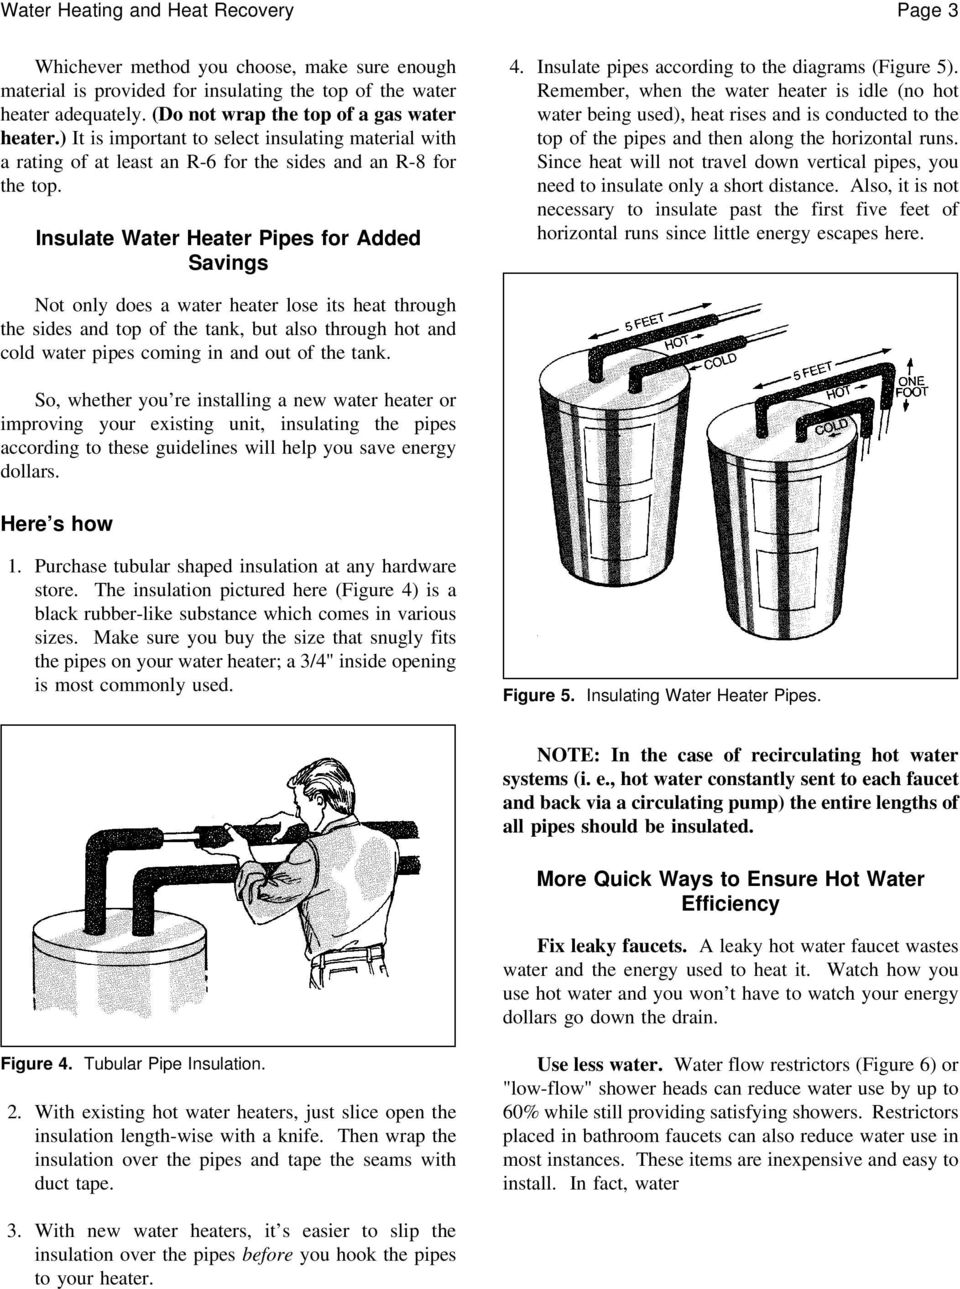 Insulate Water Heater Pipes for Added Savings 4. Insulate pipes according to the diagrams (Figure 5).